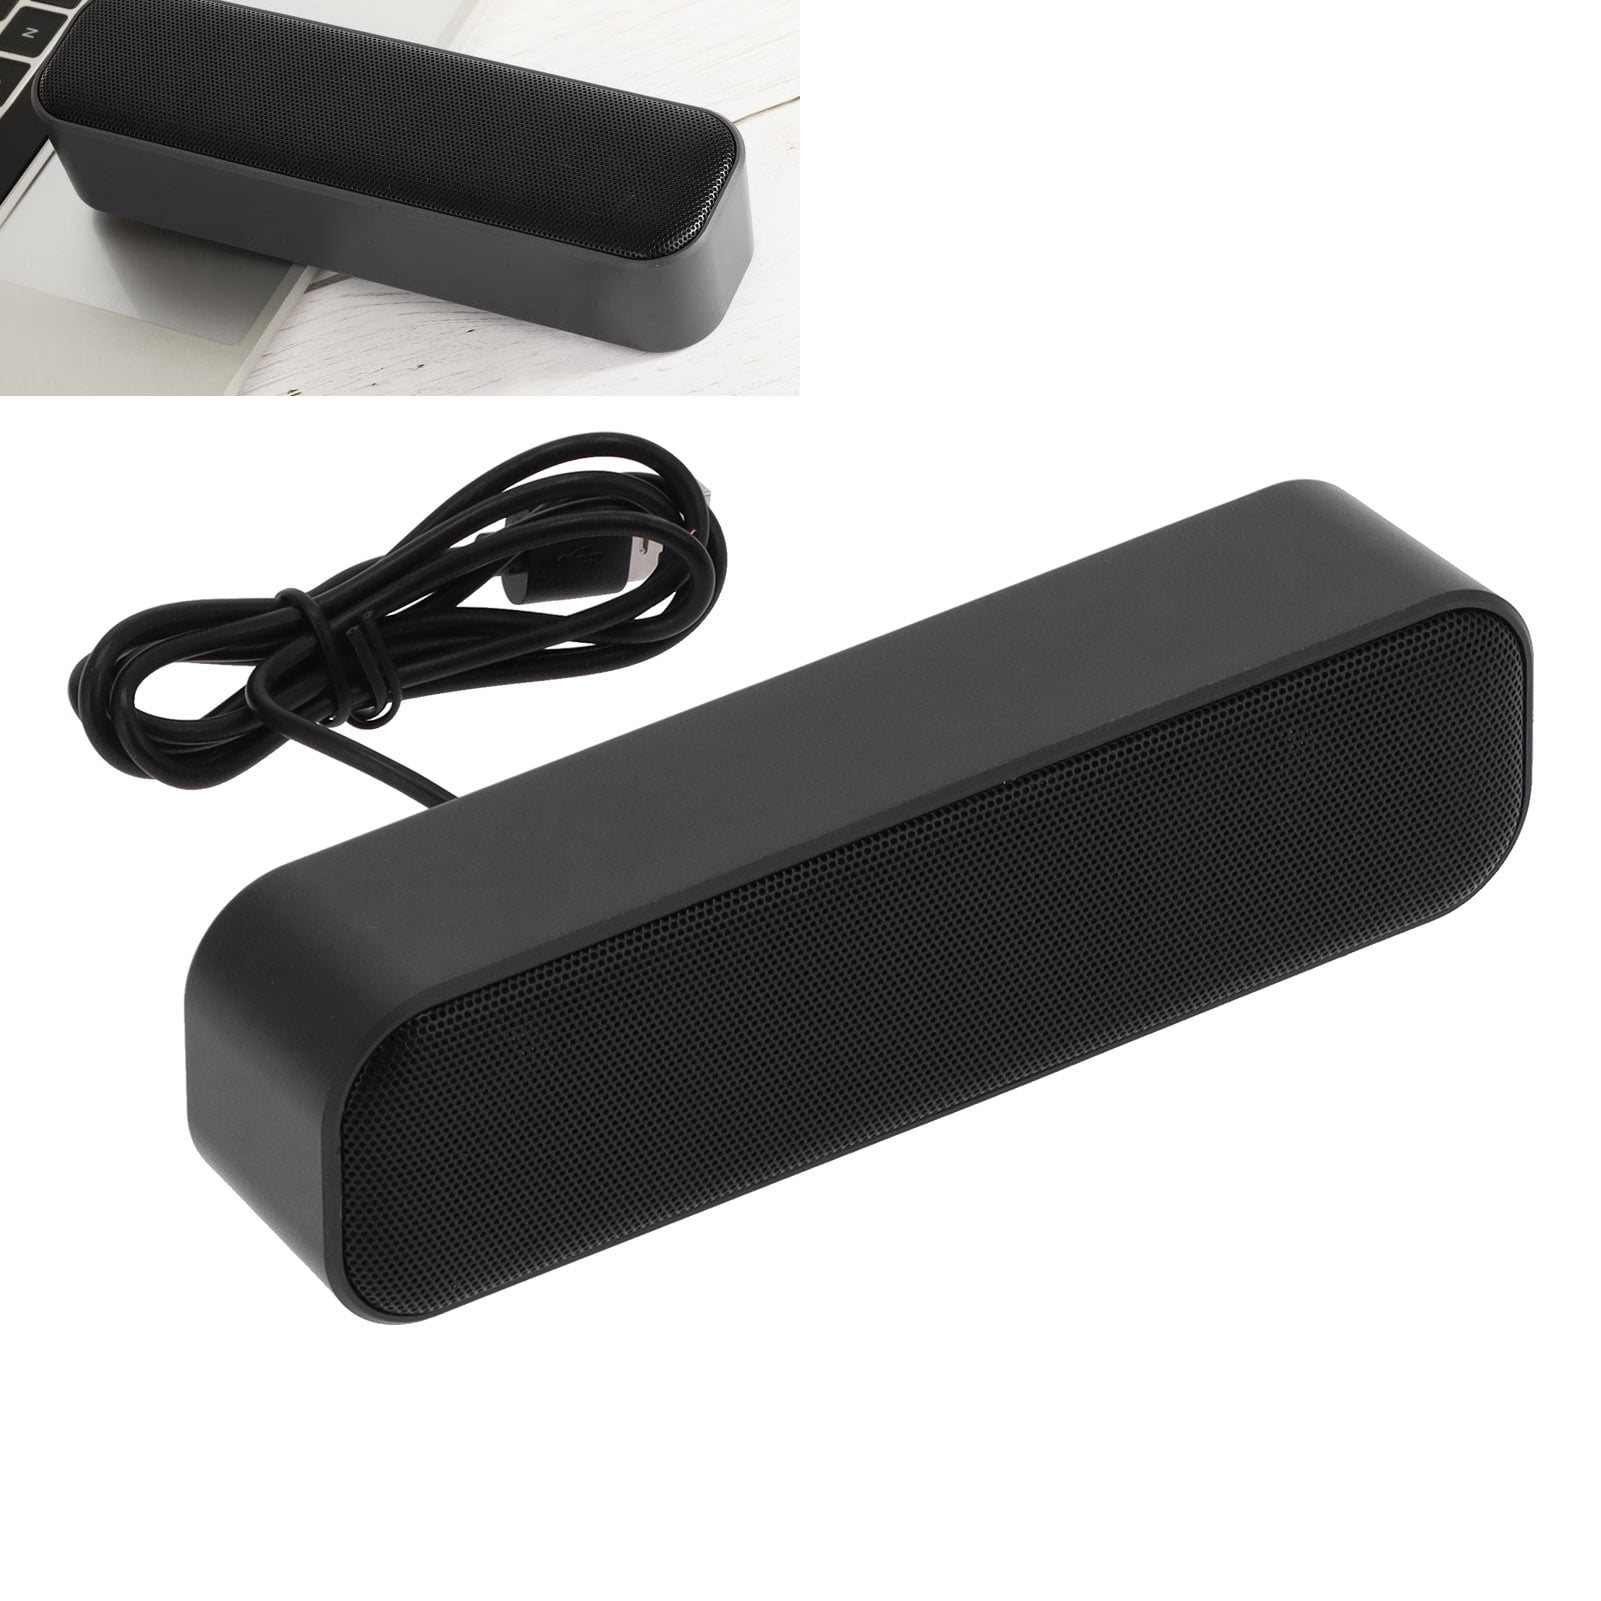 12.6 x 2.5 x 2.7 inch USB Wired Stereo Soundbar Music Player Bass Surround Sound Box with 3.5mm Input for Desktop Laptop TV Smartphone Tablet PC MP3 MP4 Black Wired Speakers Black